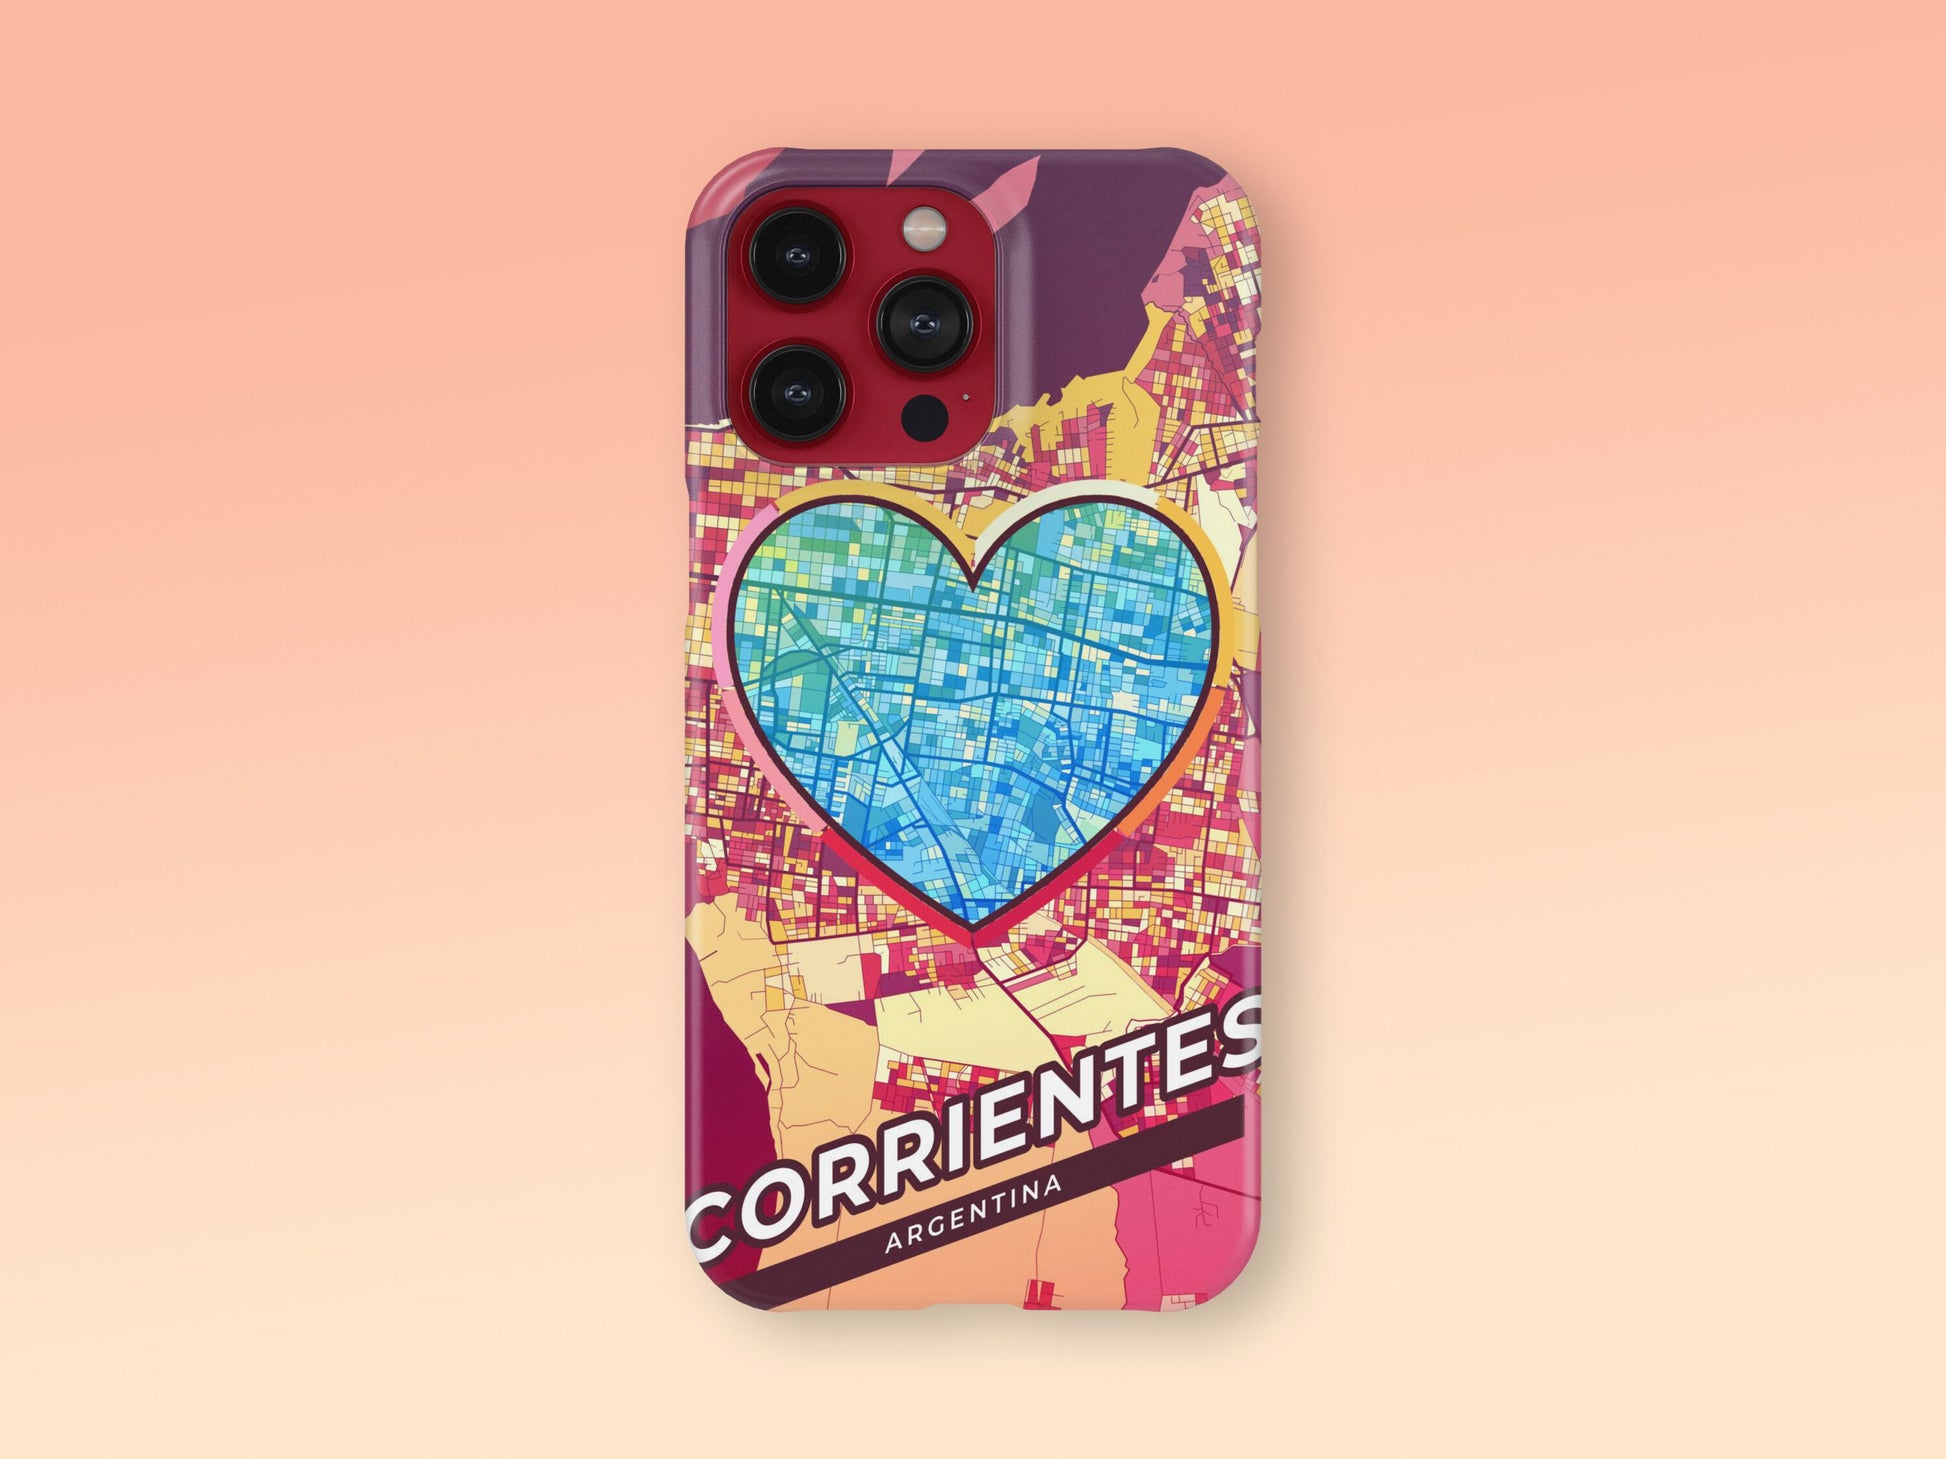 Corrientes Argentina slim phone case with colorful icon. Birthday, wedding or housewarming gift. Couple match cases. 2